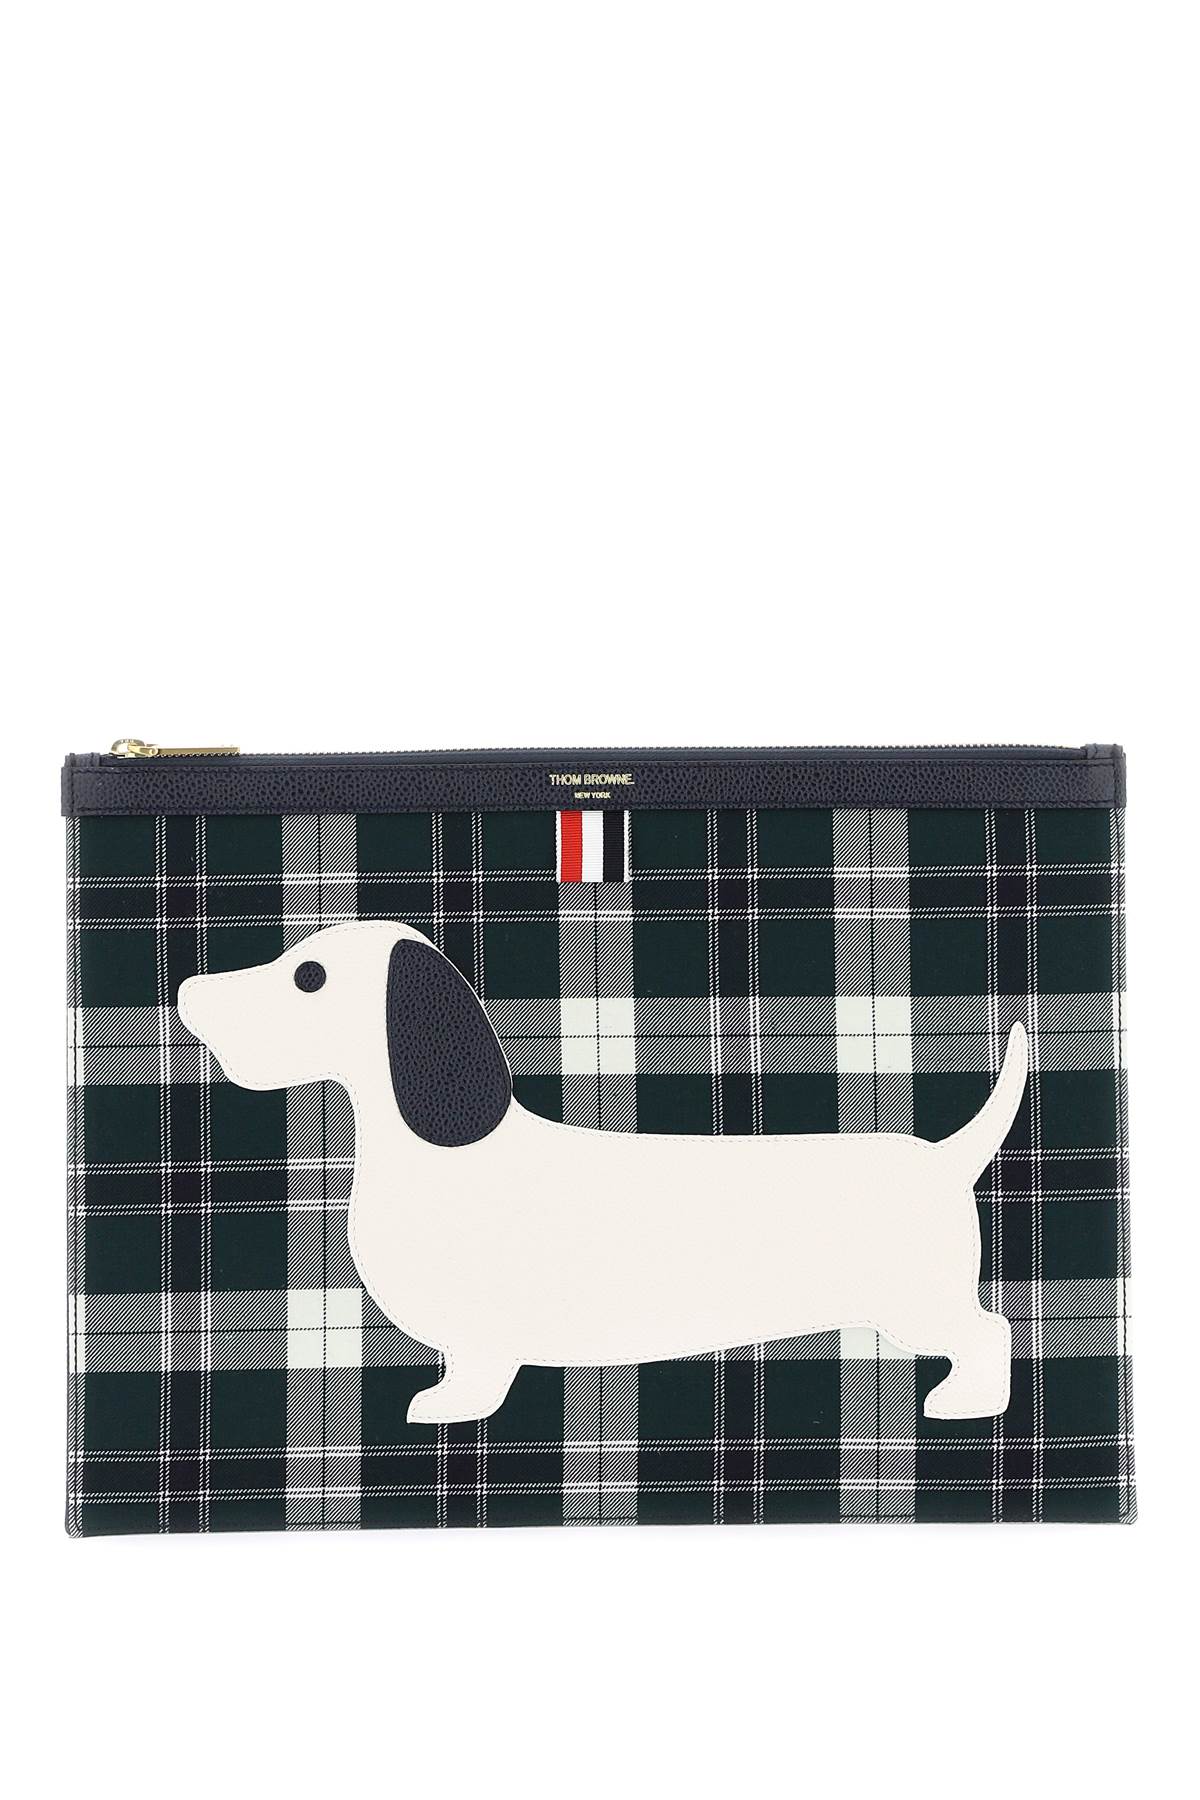 Thom Browne Hector Document Holder In Green,blue